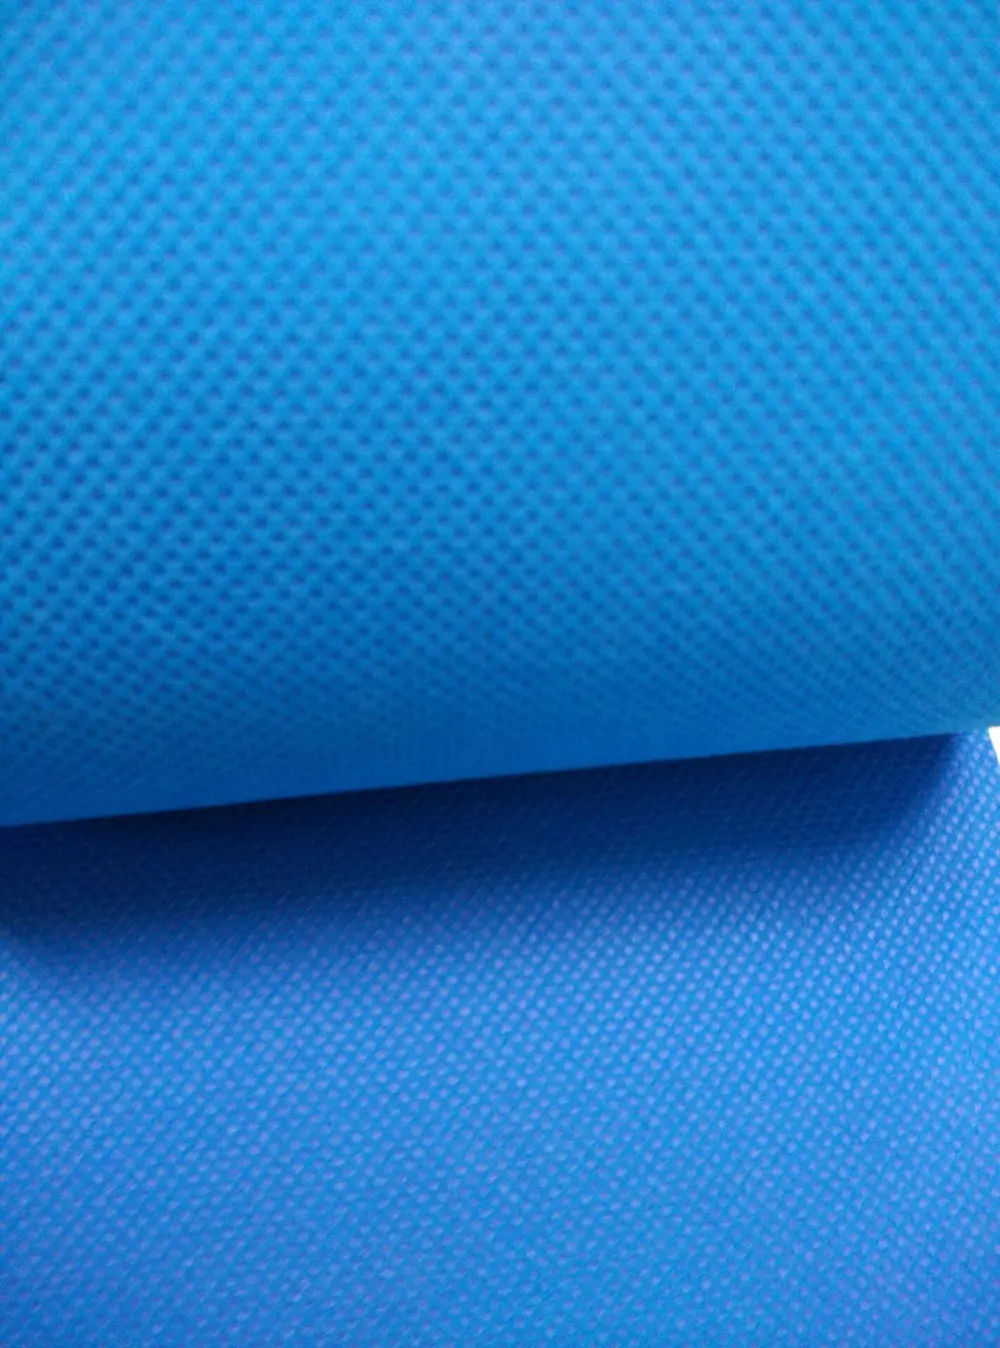 Textile Materials 100% PP Nonwoven Fabric,Cheap Raw Materials Shopping Bags